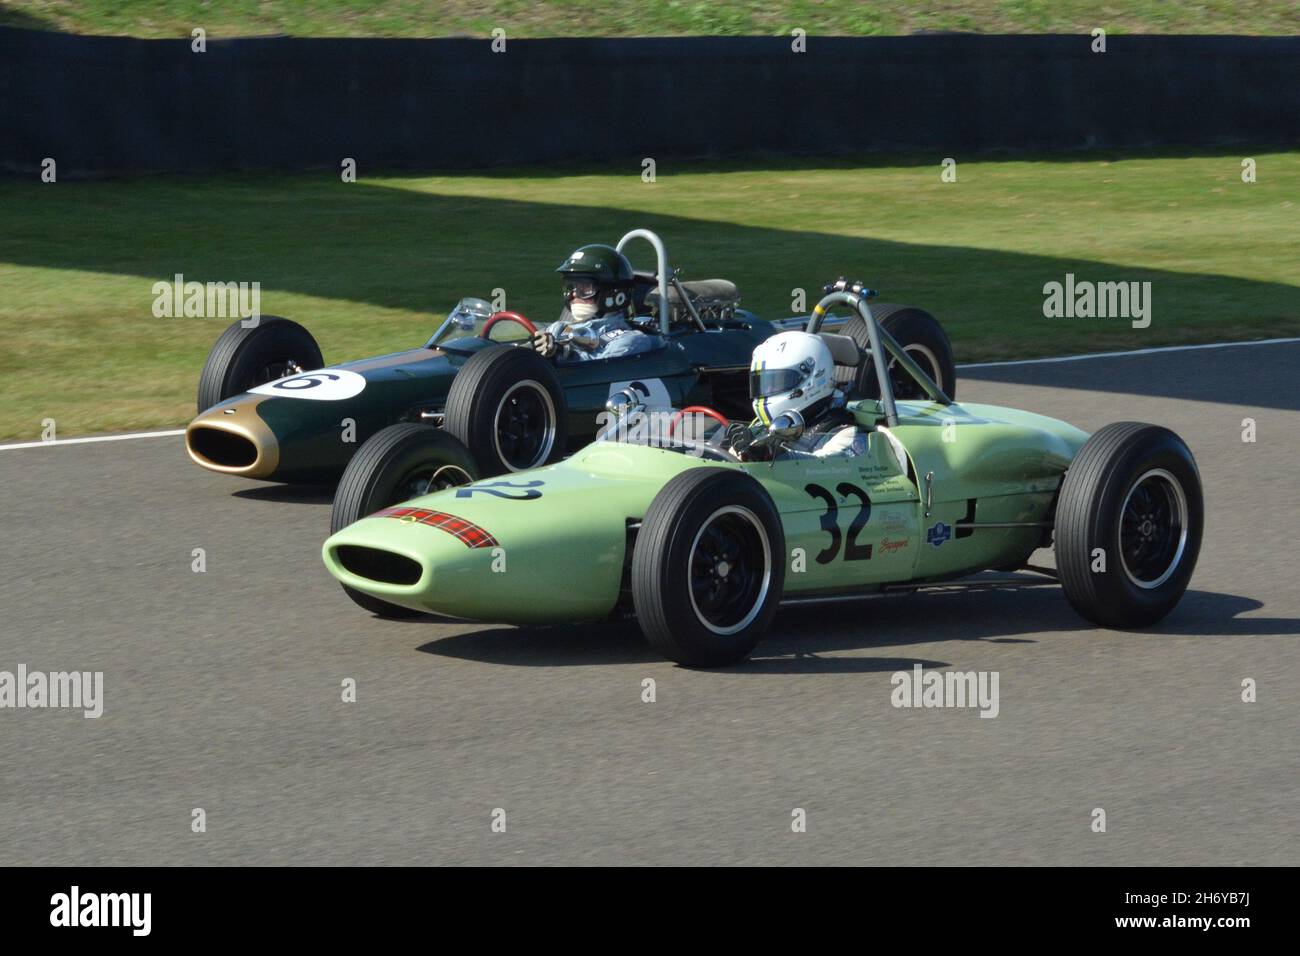 #32 Bernado Hartogs 1961 Lotus Climax 18/21 in the Glover Trophy race Goodwood Revival 18th Sep 2021 Stock Photo